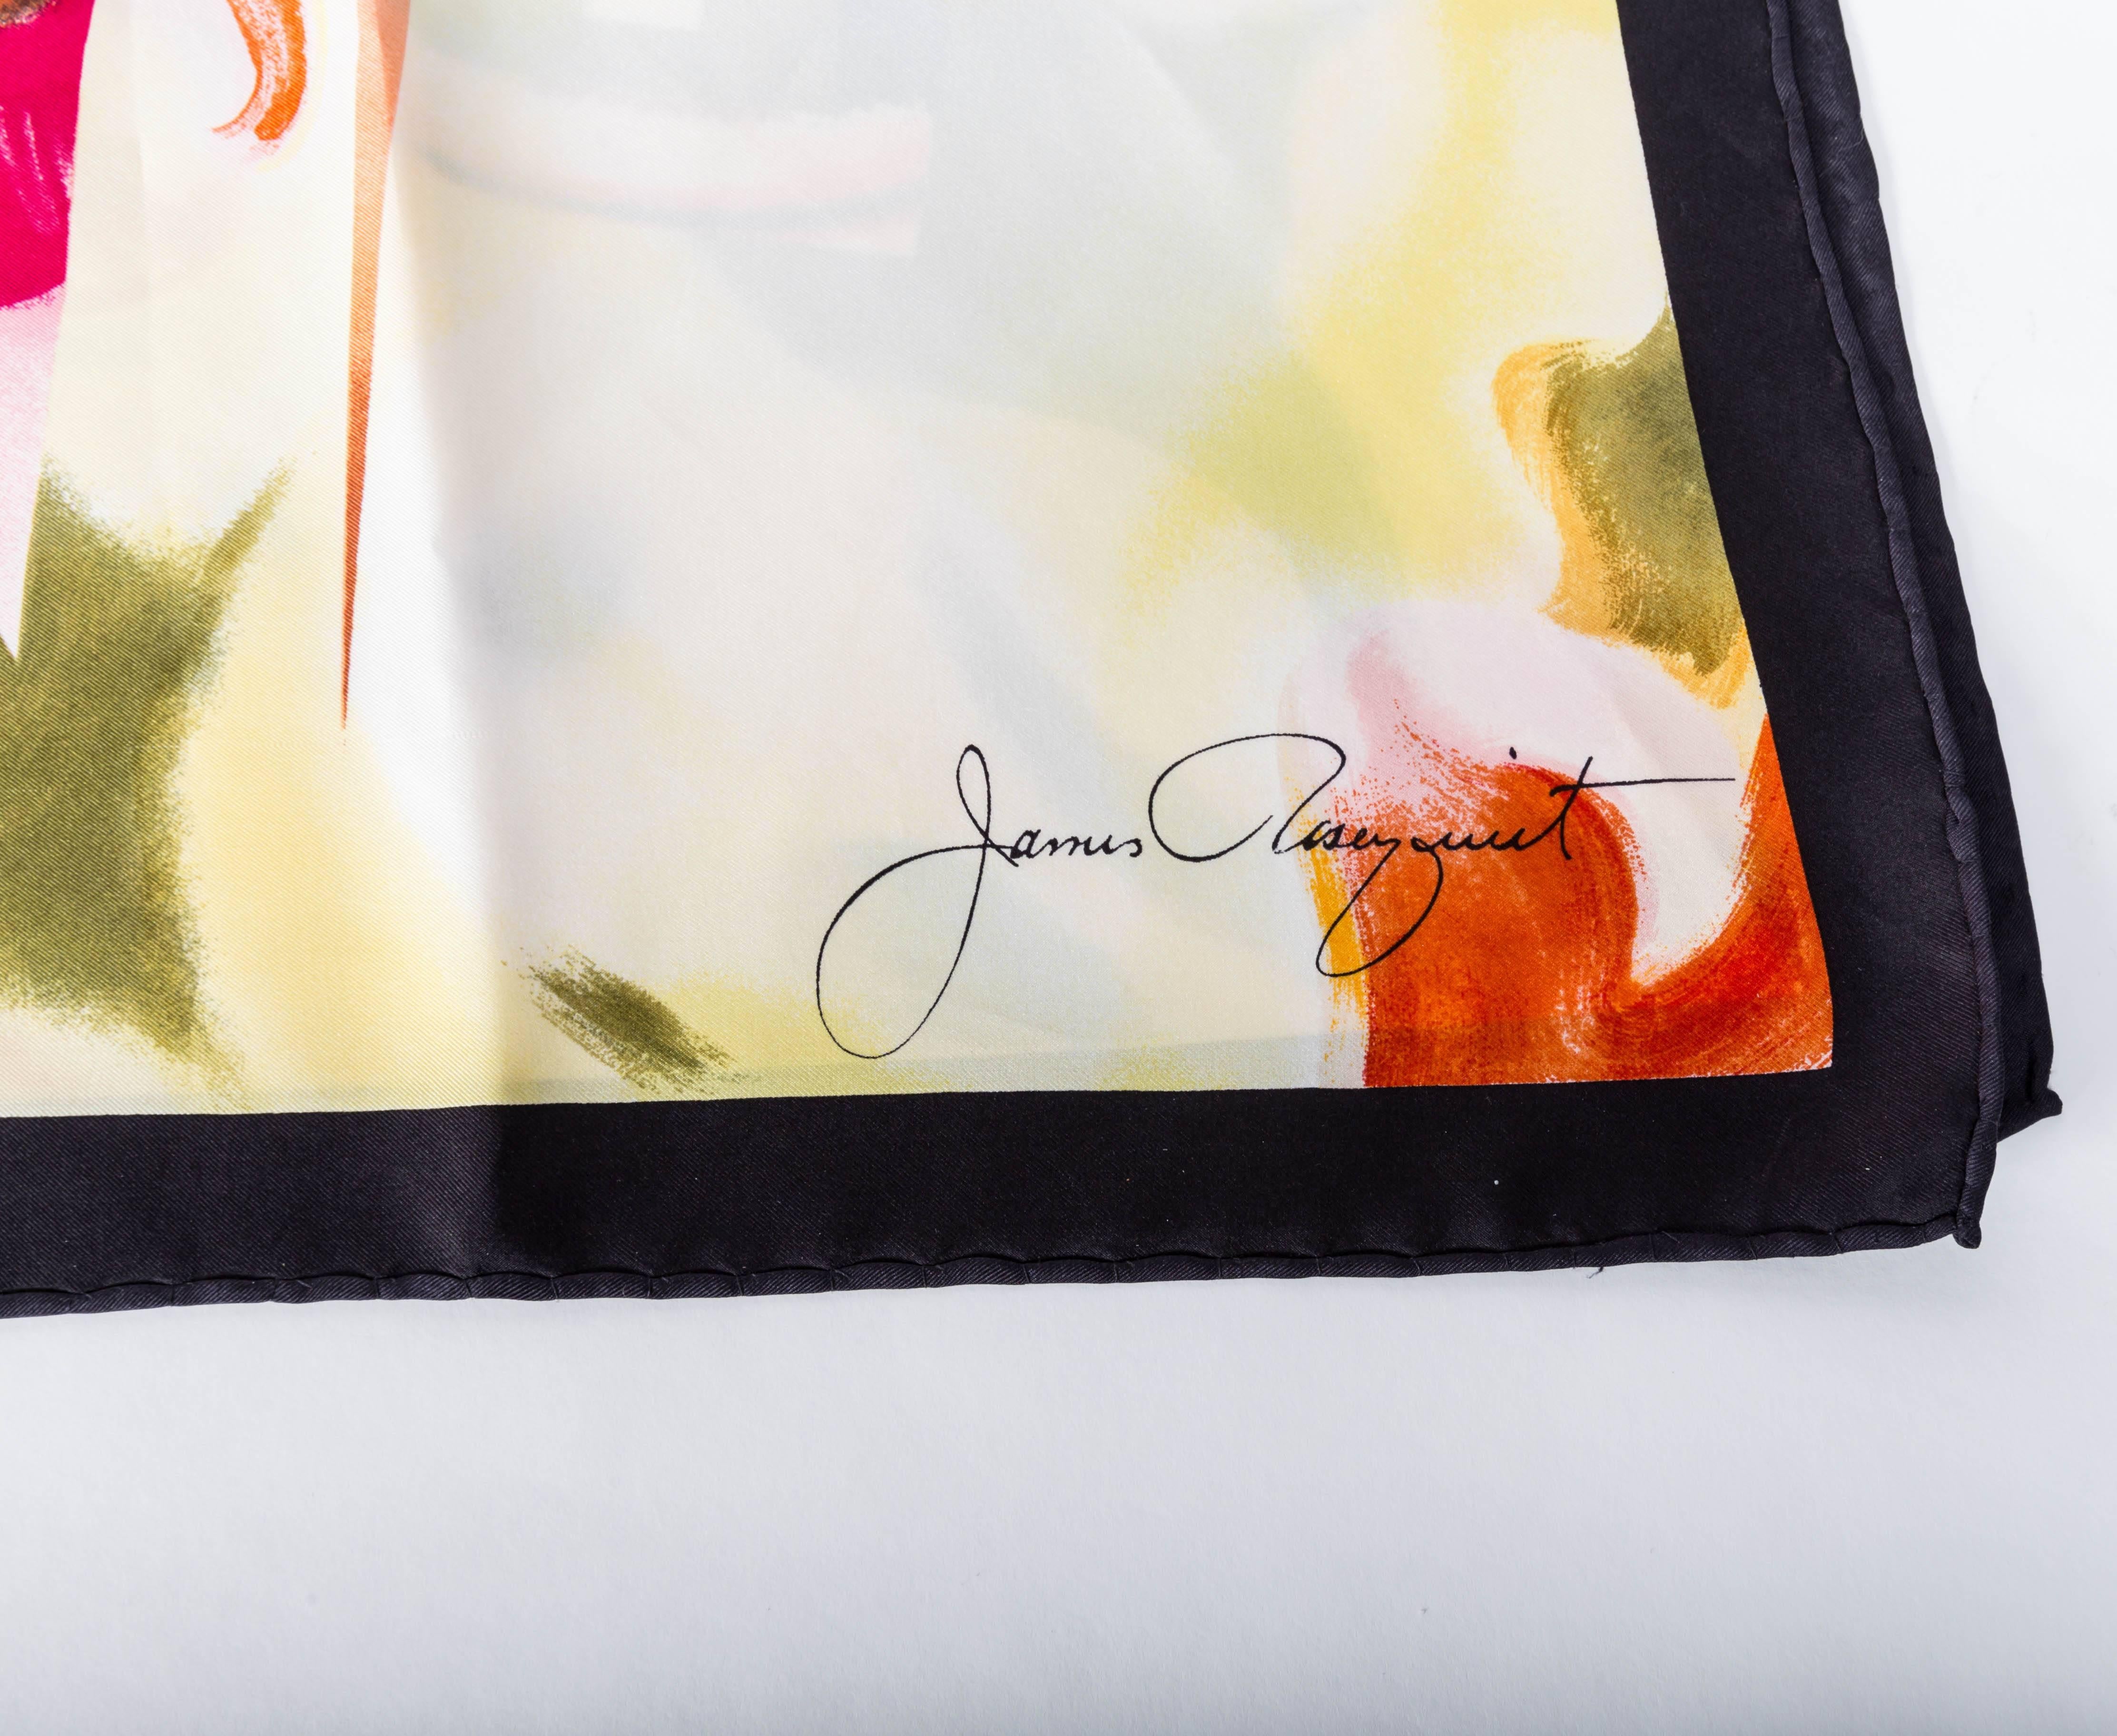 Louis Vuitton Silk Scarf by James Rosenquist In Excellent Condition For Sale In Westhampton Beach, NY